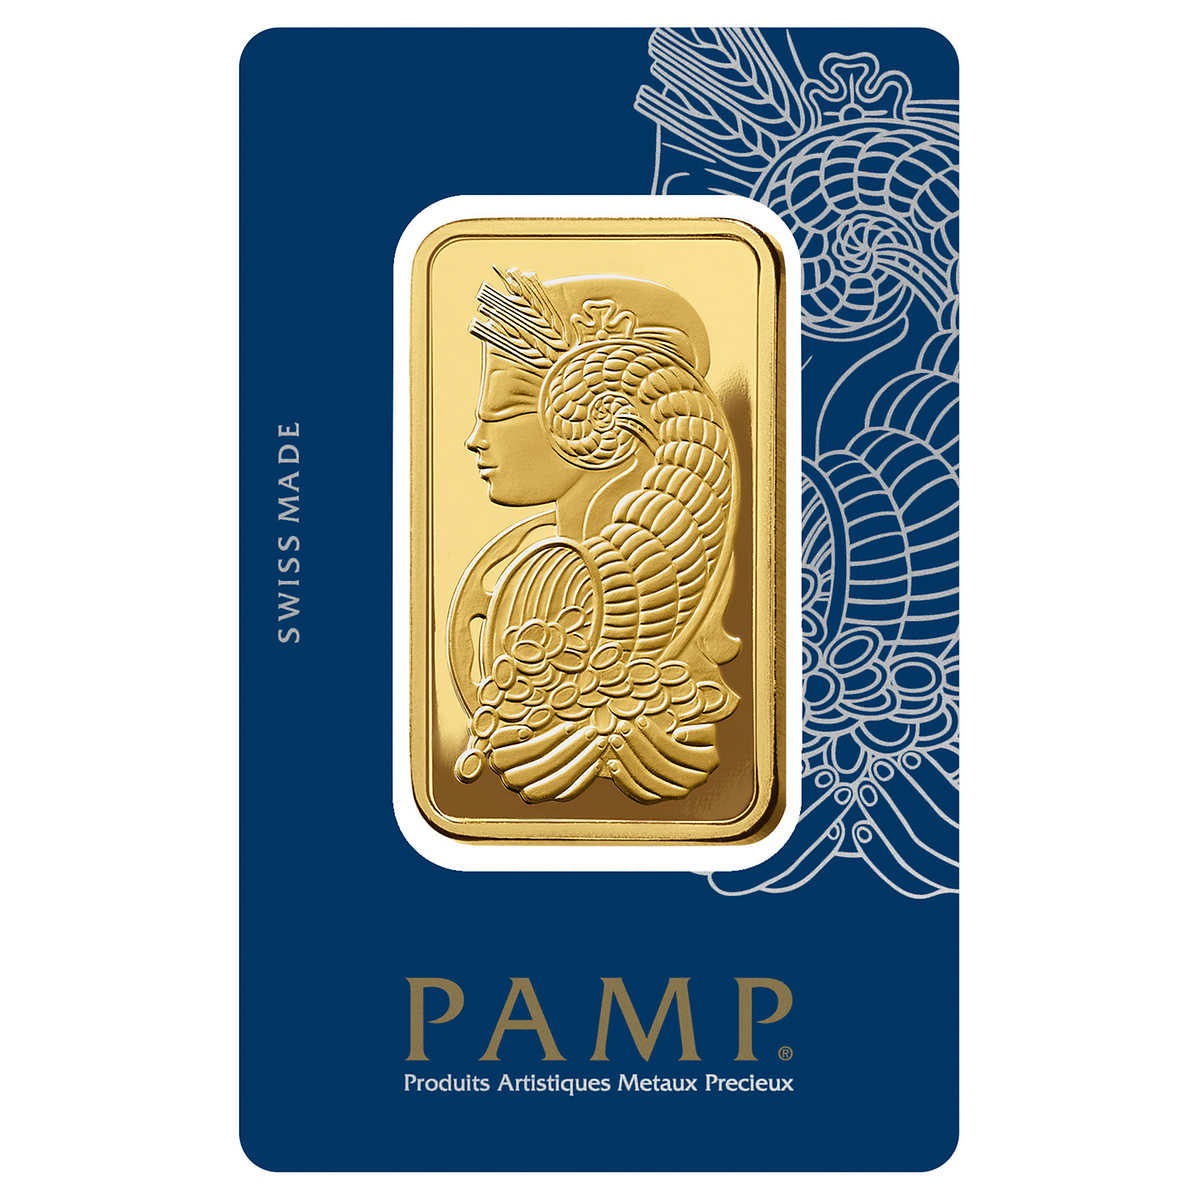 100 Gram Gold Bar Pamp Suisse Lady Fortuna Veriscan (New In Assay) | Costco